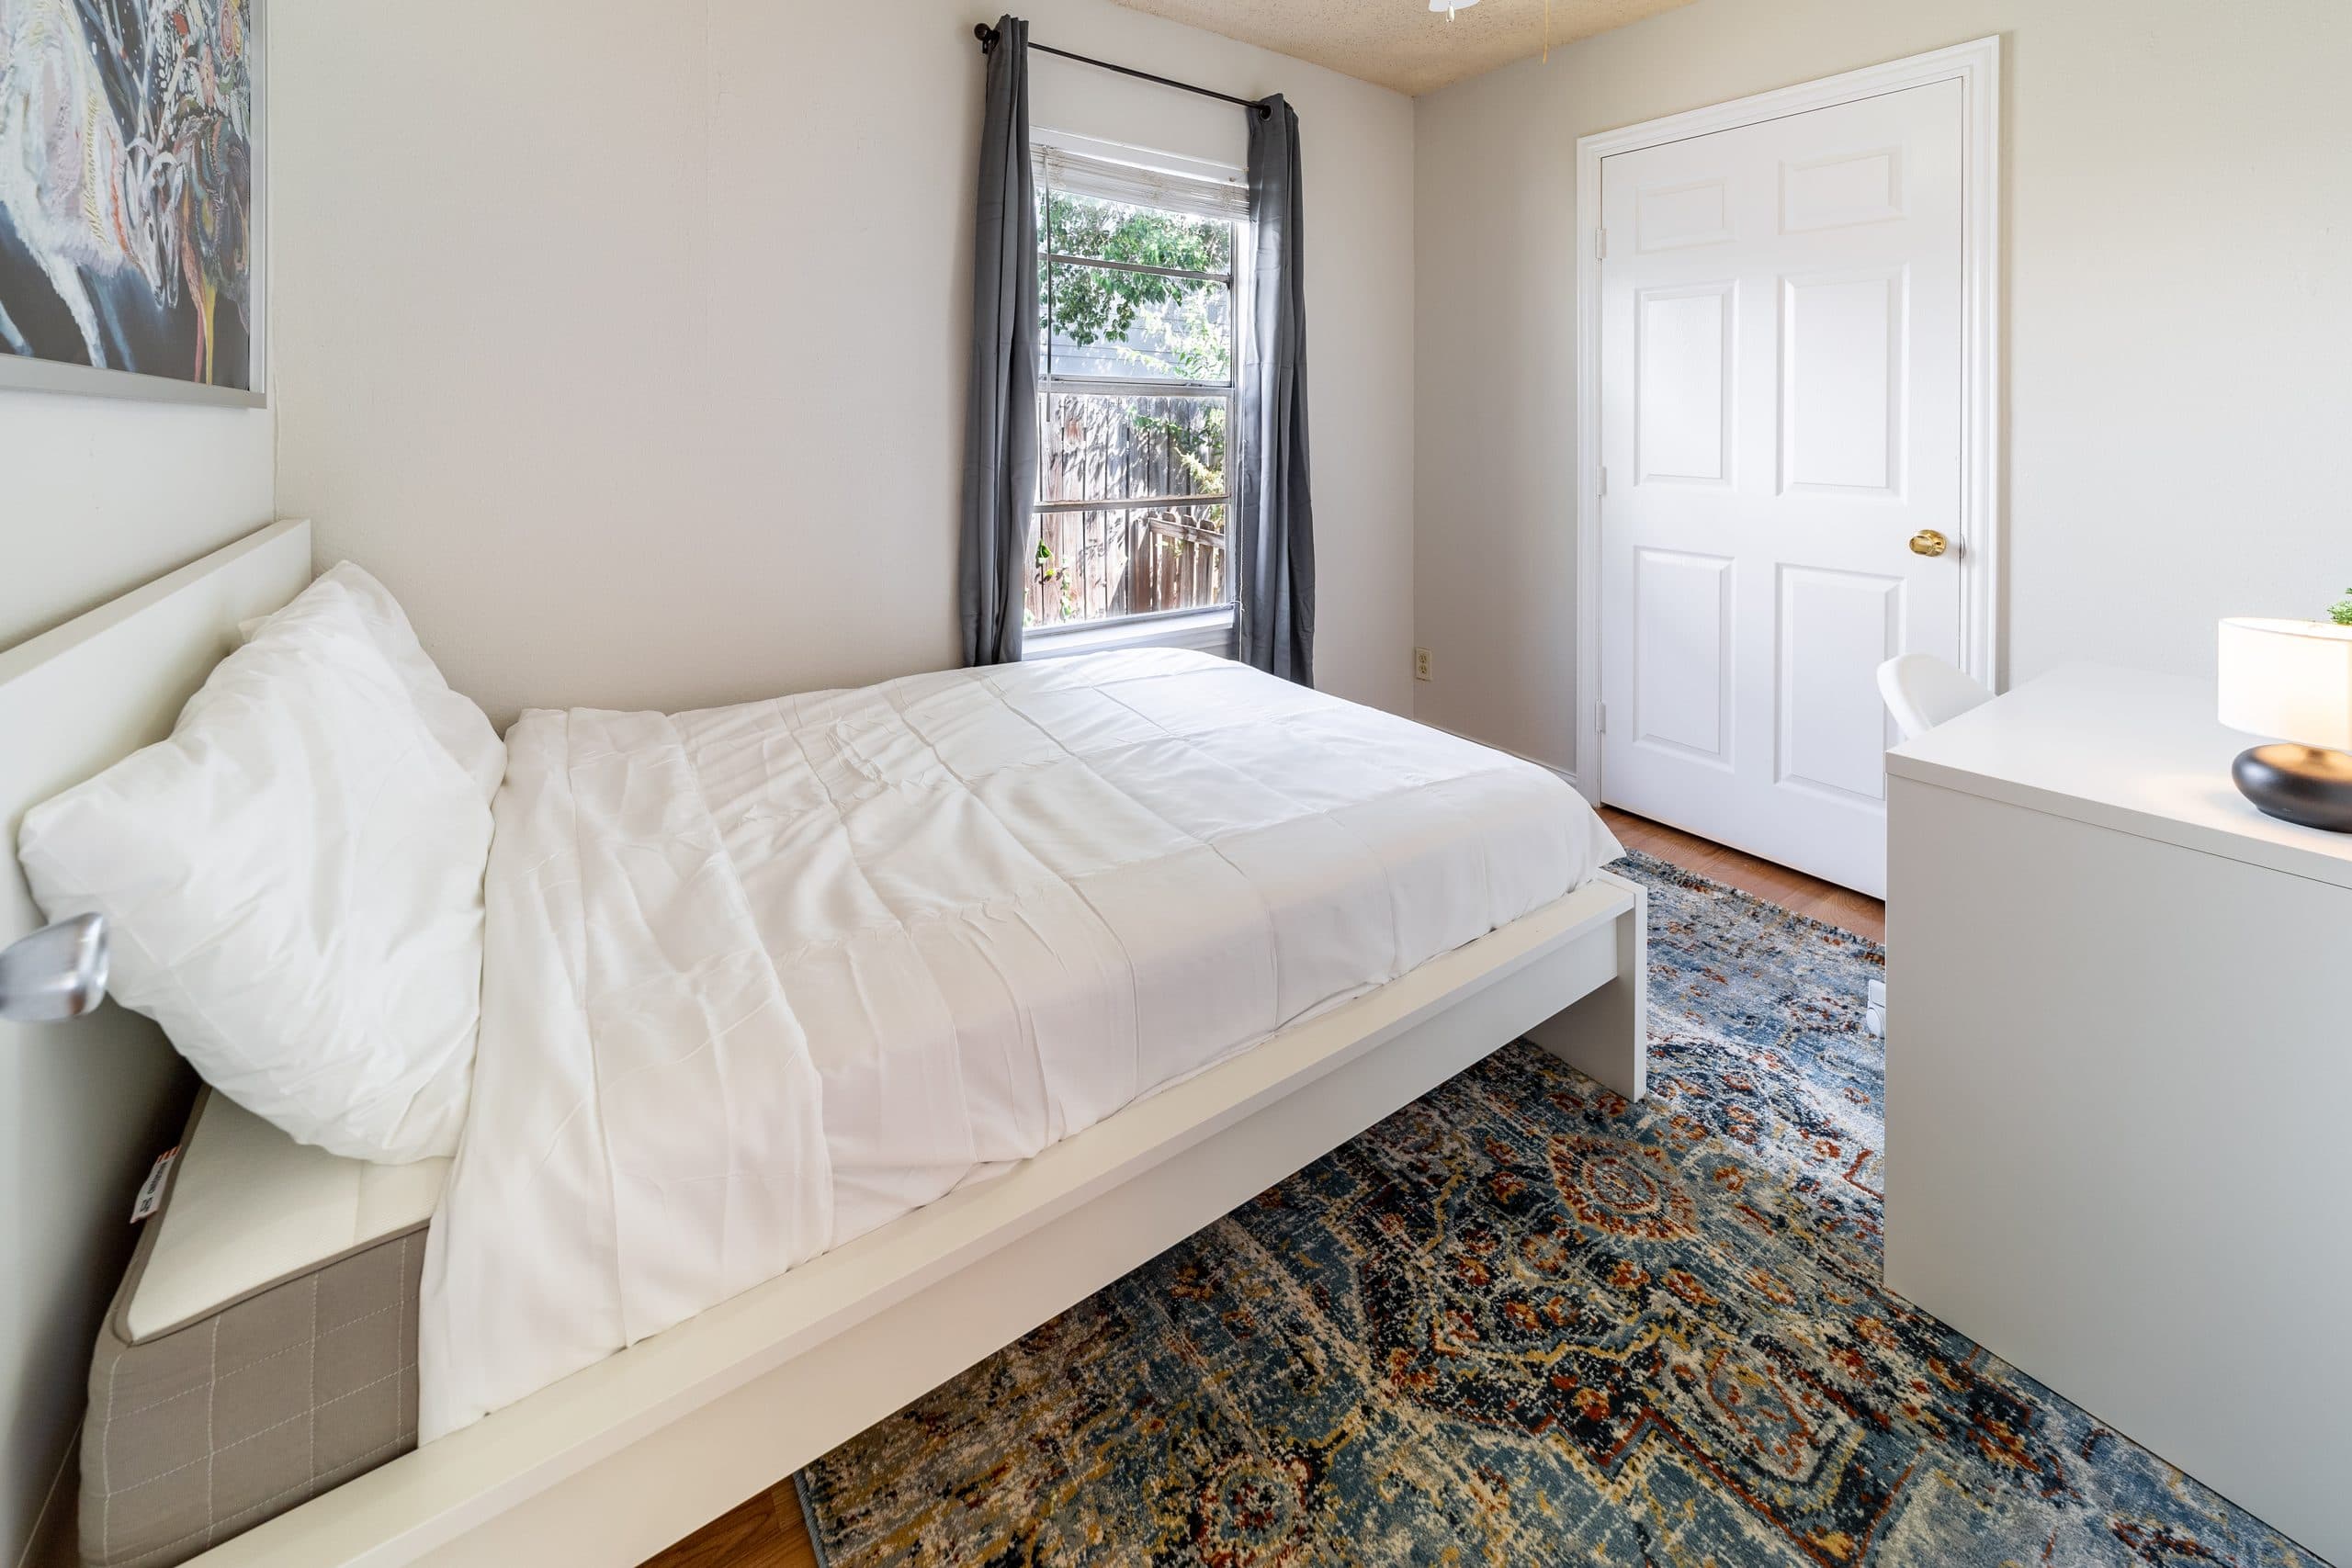 Photo 19 of #4430: Queen Bedroom A at June Homes